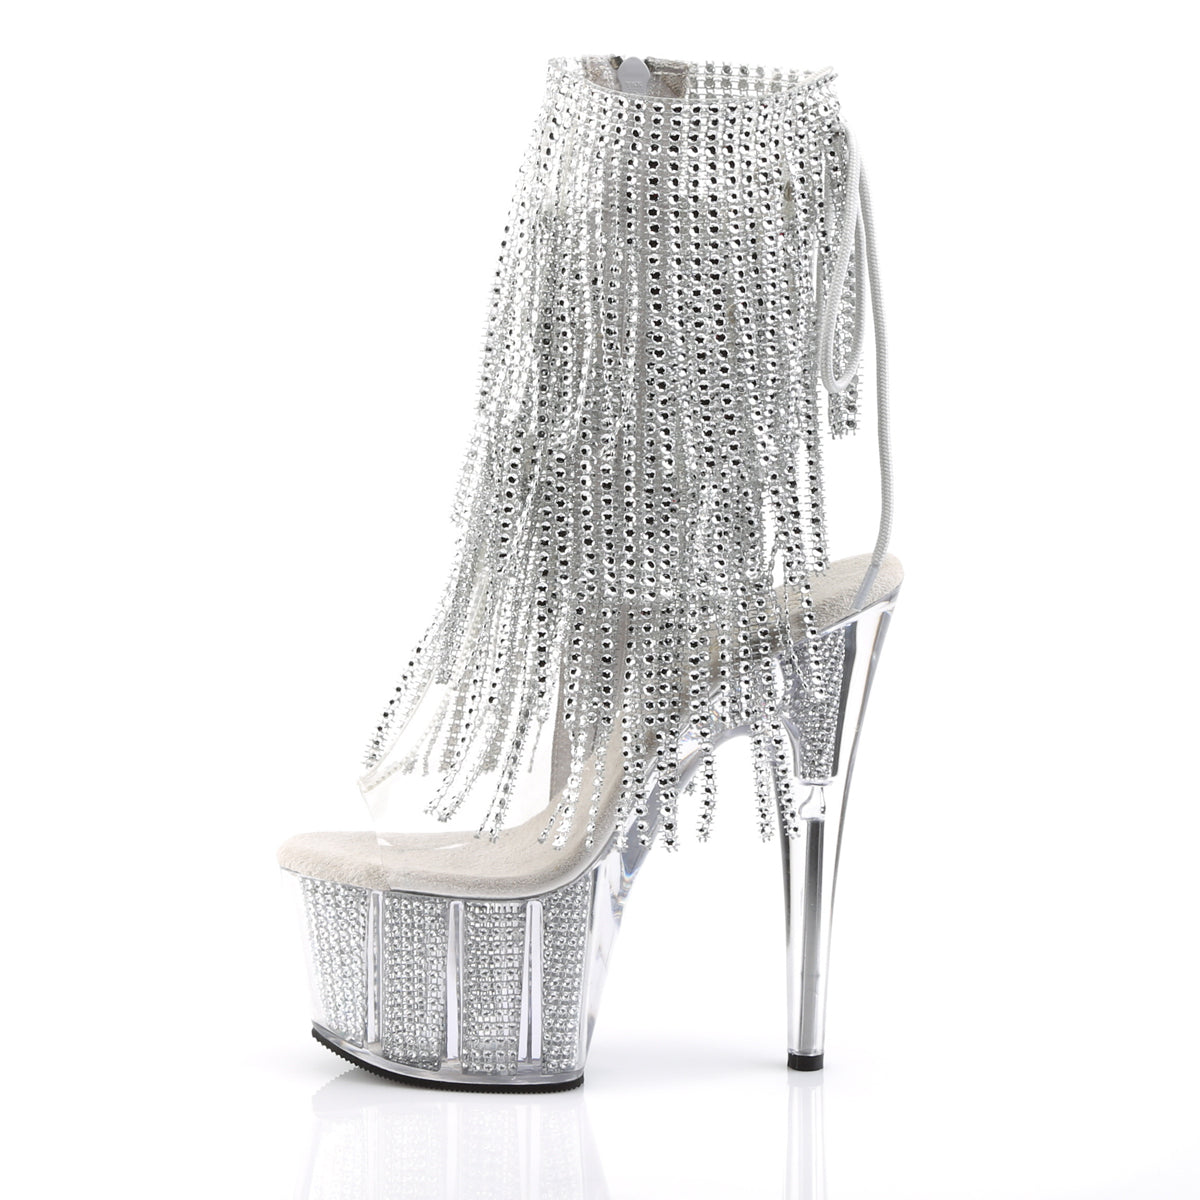 ADORE-1017SRS 7" Heel Clear and Silver Strippers Ankle Boots-Pleaser- Sexy Shoes Pole Dance Heels